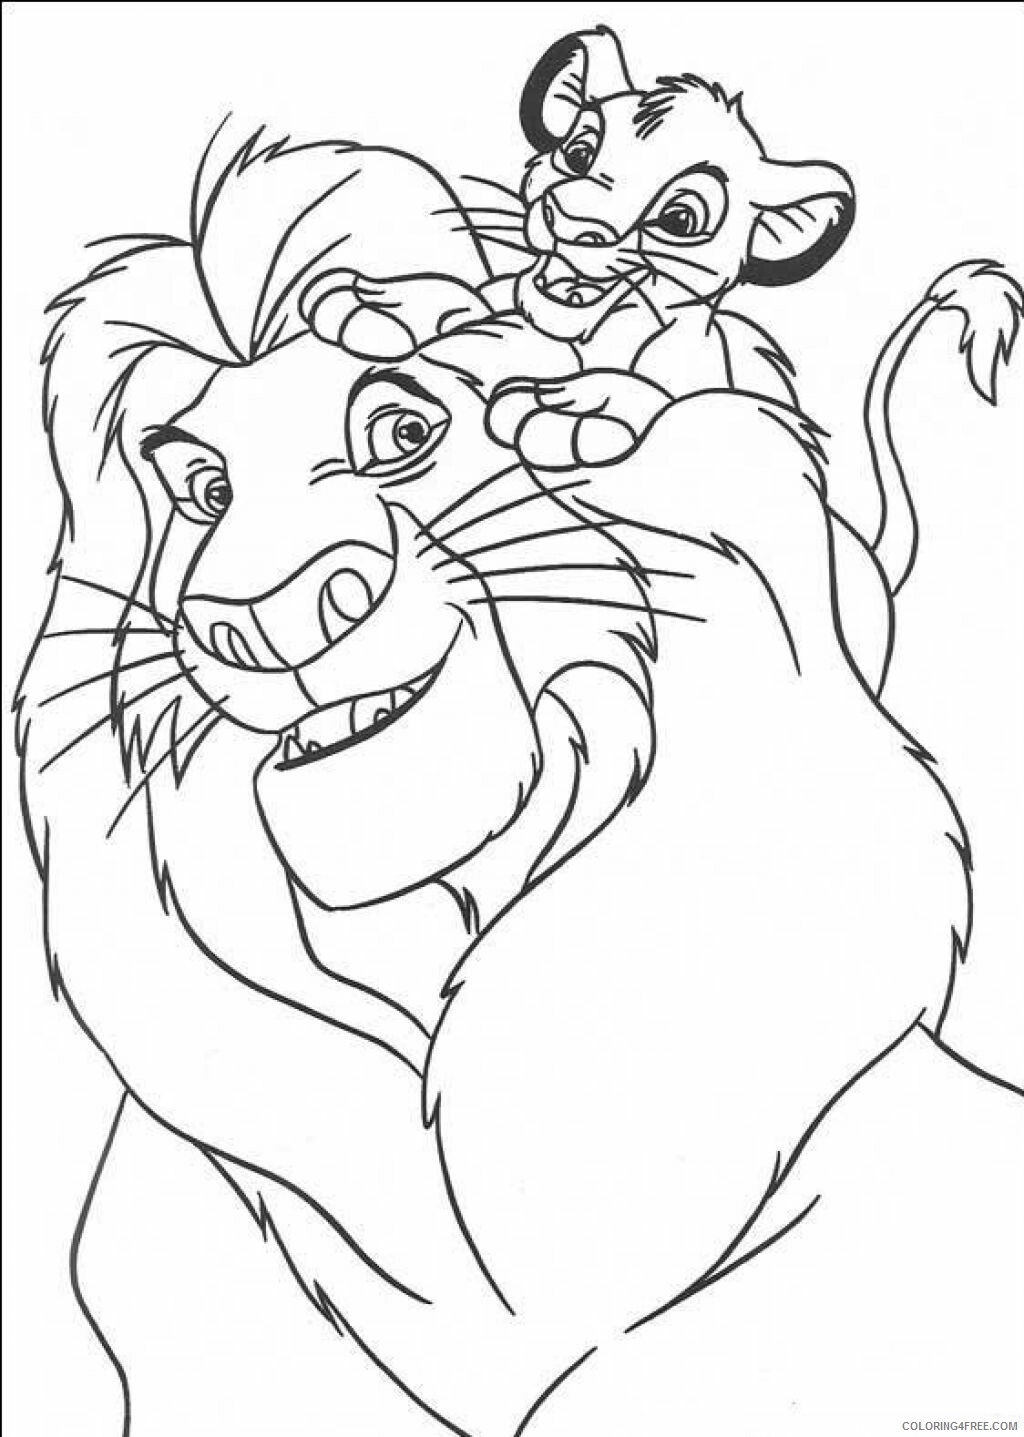 Simba Coloring Pages Simba For Printable 2021 5407 Coloring4free